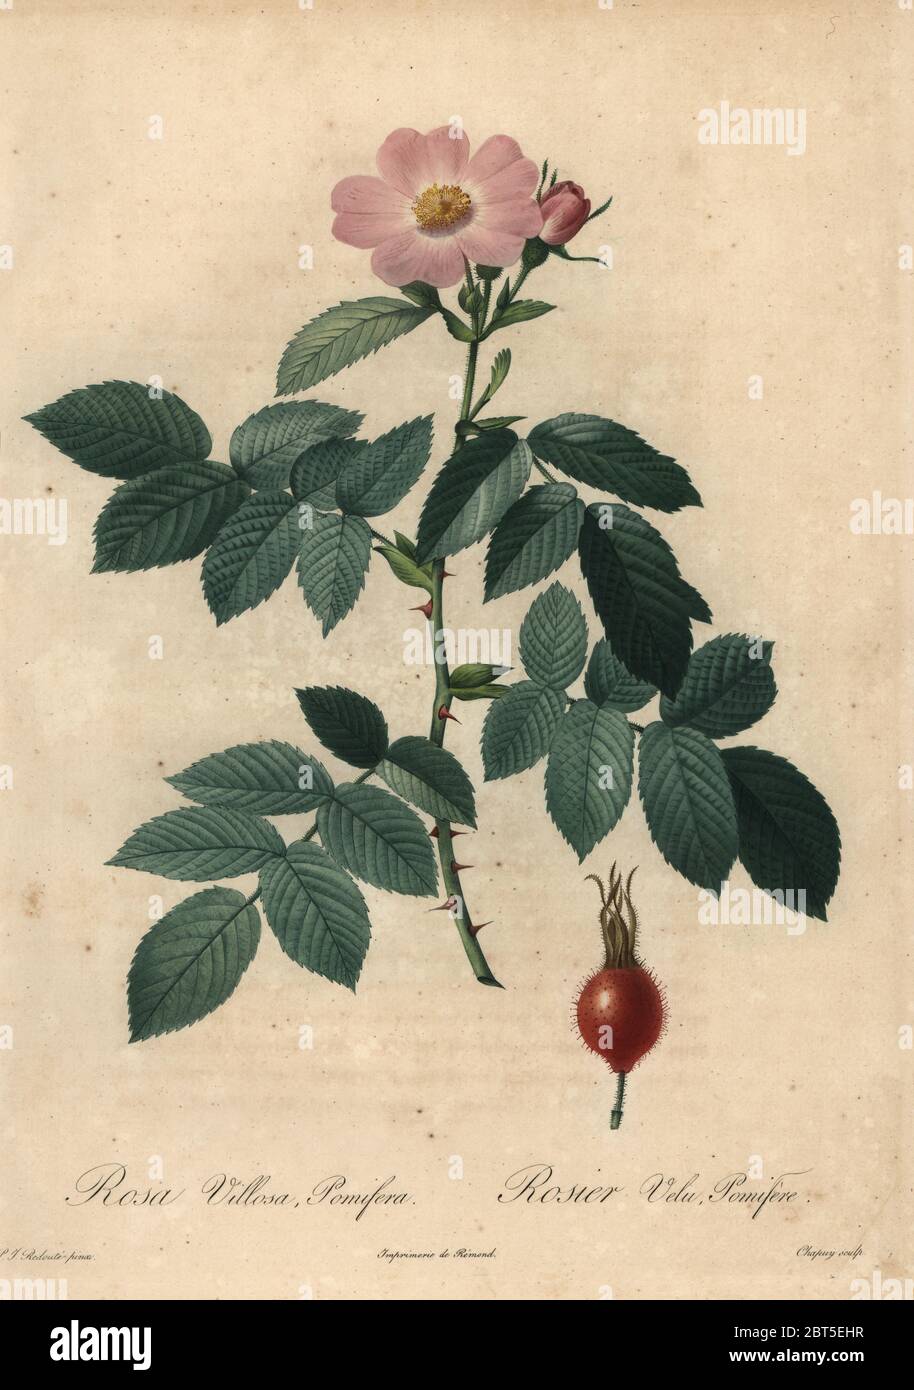 Pink apple rose, Rosa villosa. Rosa villosa var. pomifera, Rosier Velu Pomifere. Stipple copperplate engraving by Jean Baptiste Chapuy handcoloured a la poupee after a botanical illustration by Pierre-Joseph Redoute from the first folio edition of Les Roses, Firmin Didot, Paris, 1817. Stock Photo